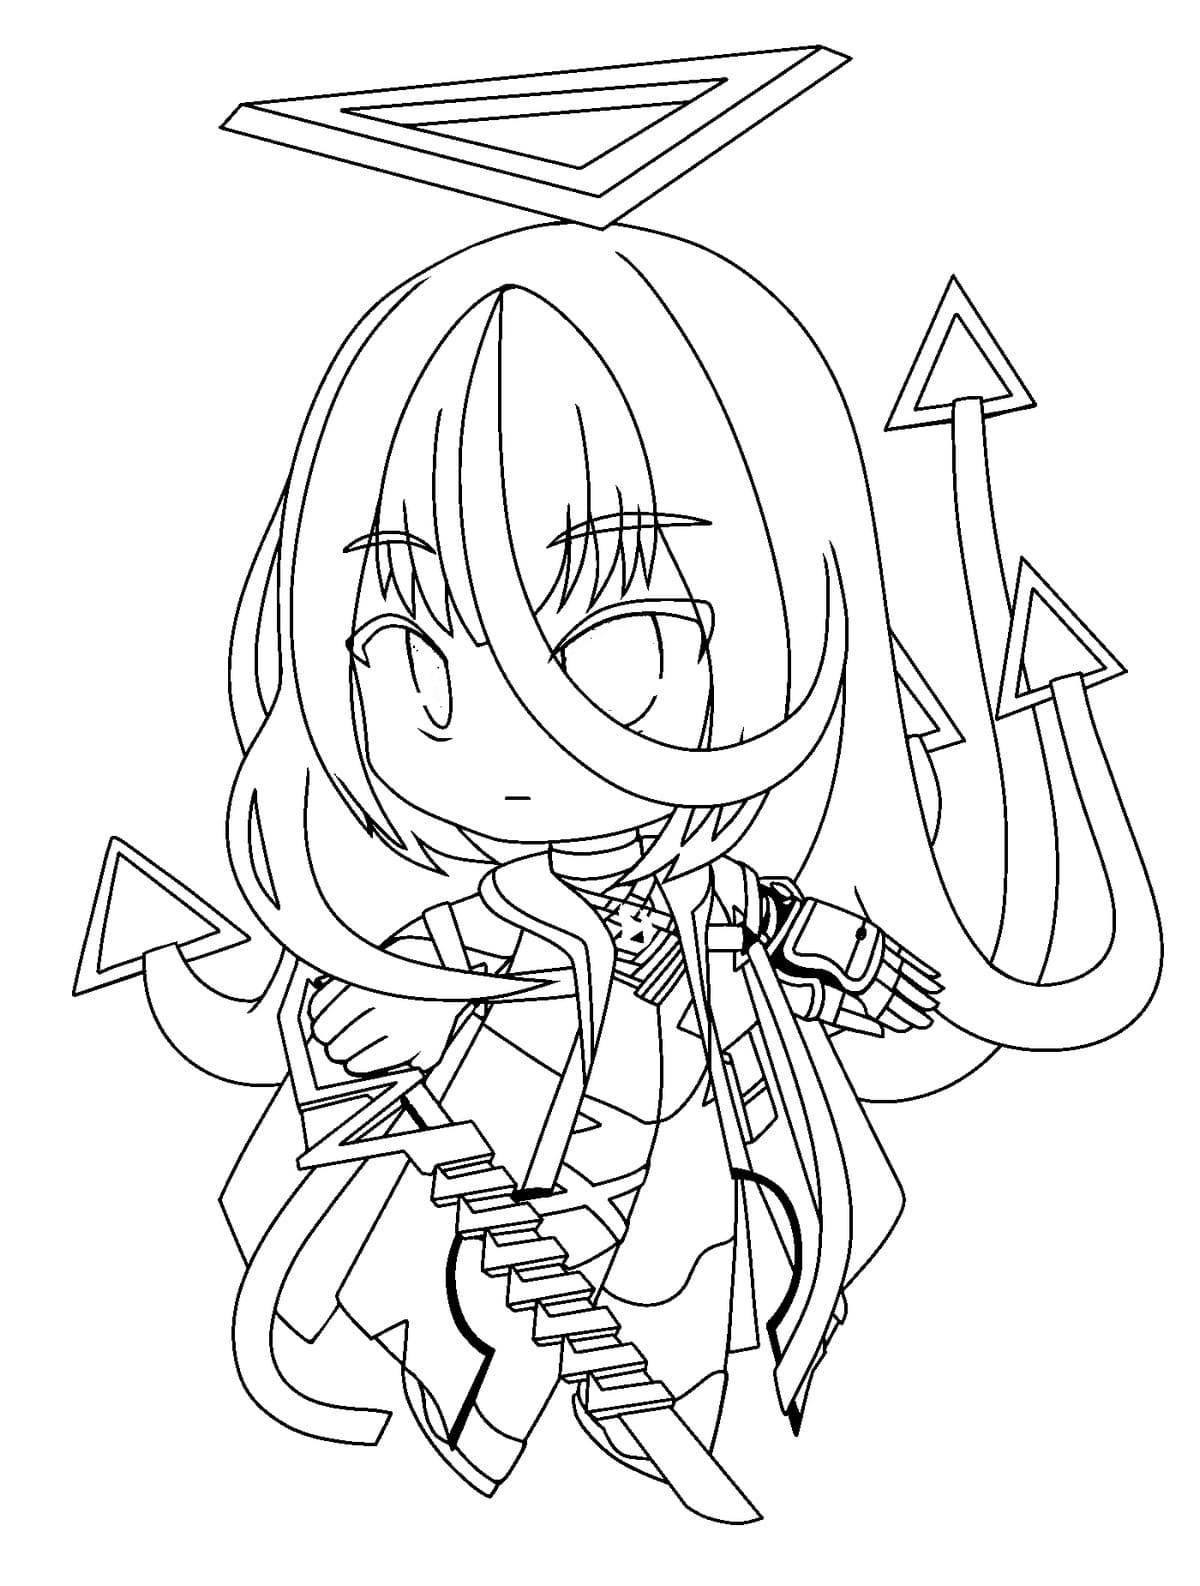 Coloring page Chibi Anime girl with a sword